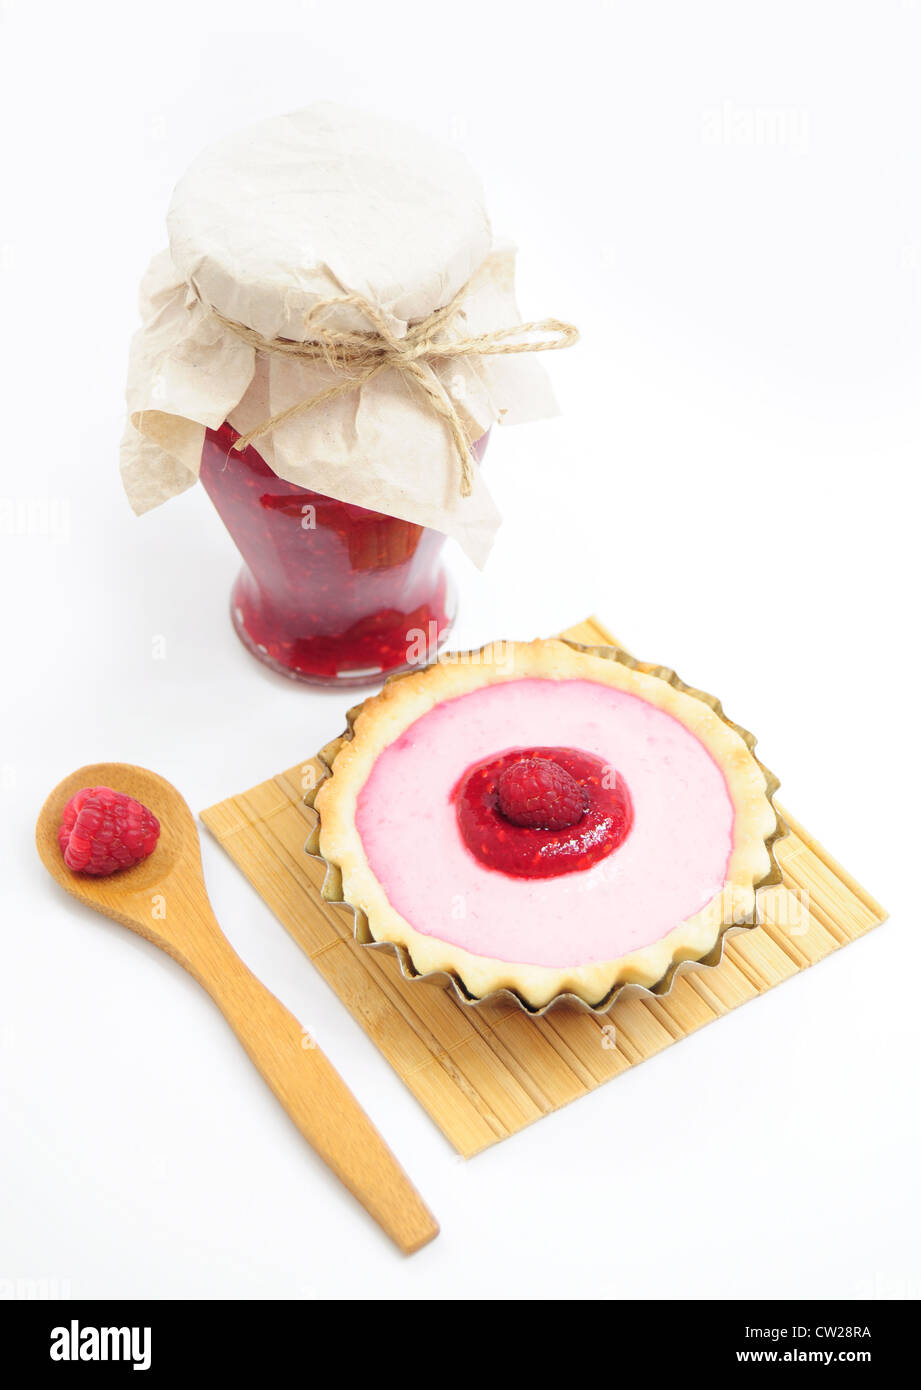 Jar of raspberry jam, tart with cream and wooden spoon with fresh fruit Stock Photo